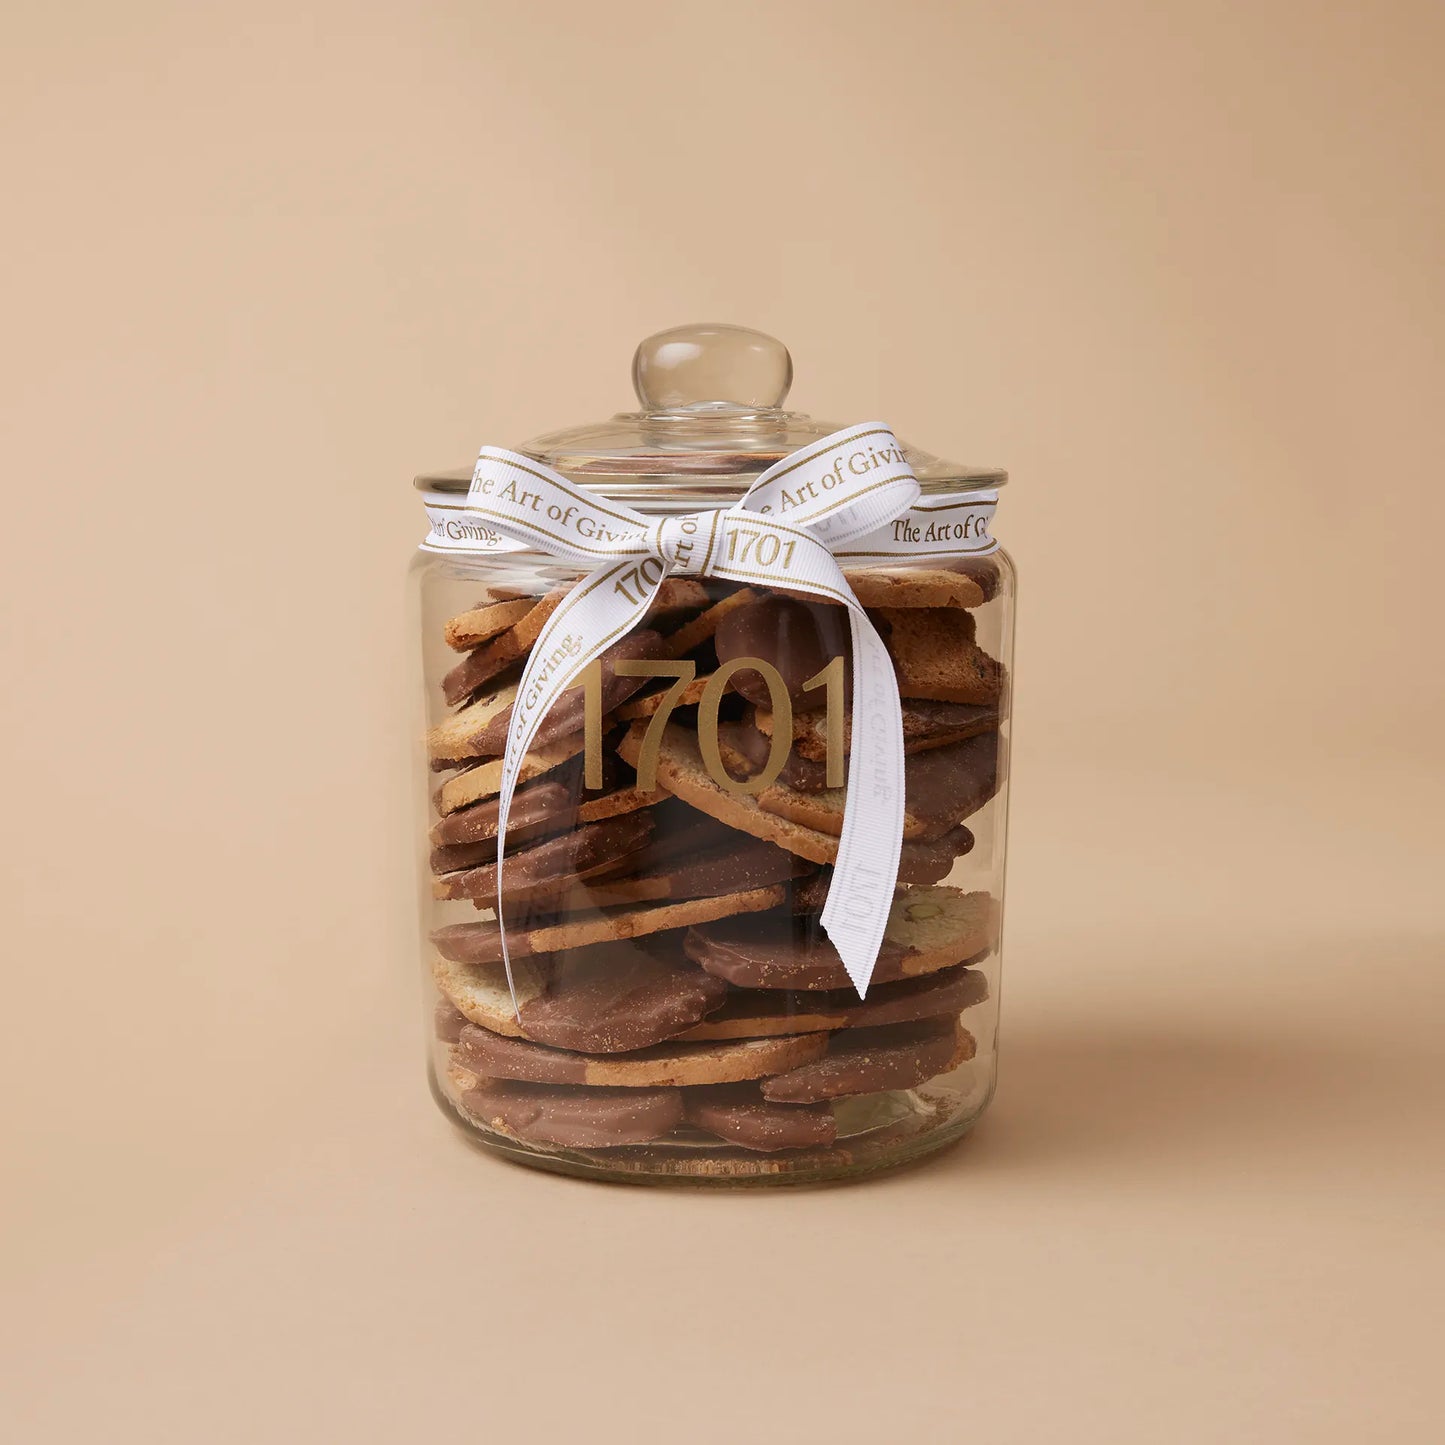 "Belgian Milk Chocolate Dipped Italian Biscotti" gift jar featuring a 1kg glass jar of handmade biscuits dipped in Belgian milk chocolate. The biscuits are presented in a glass jar with a hand-tied signature ribbon on a warm background, with the product label visible on the front of the jar. The biscuits are SANHA Halaal approved, making them a perfect gift idea for anyone who appreciates high-quality biscuits made with care.